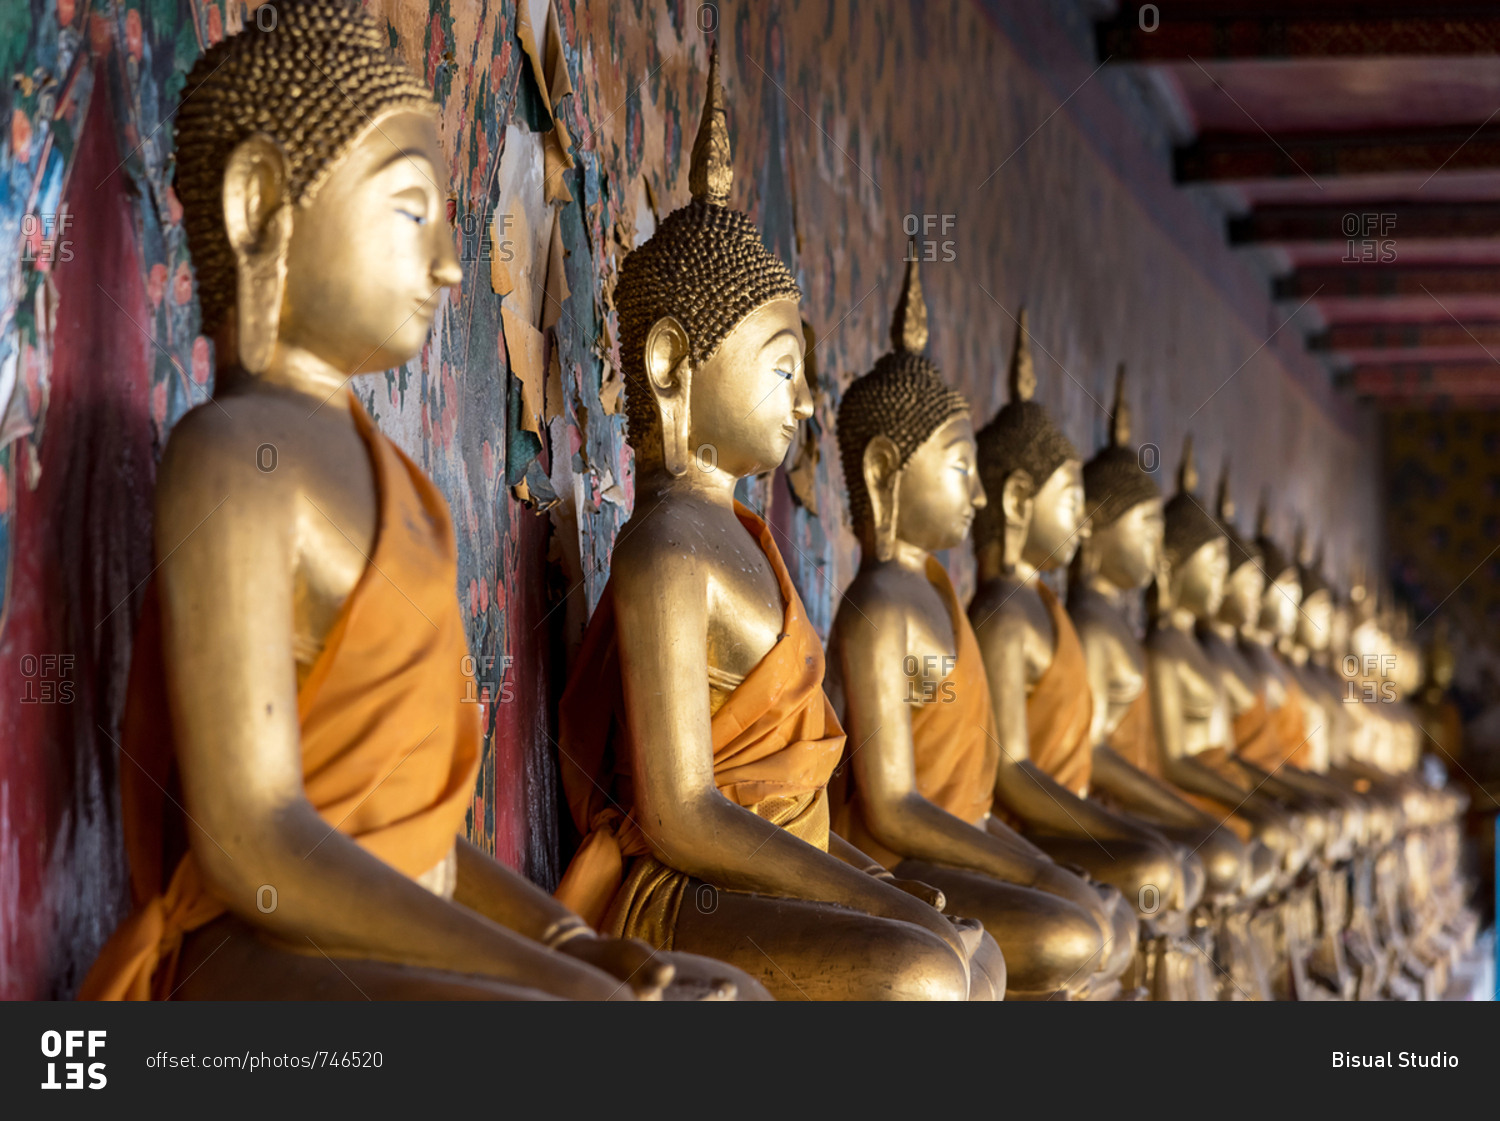 Golden similar statues of Buddha placed in line near patterned wall in Buddhist temple